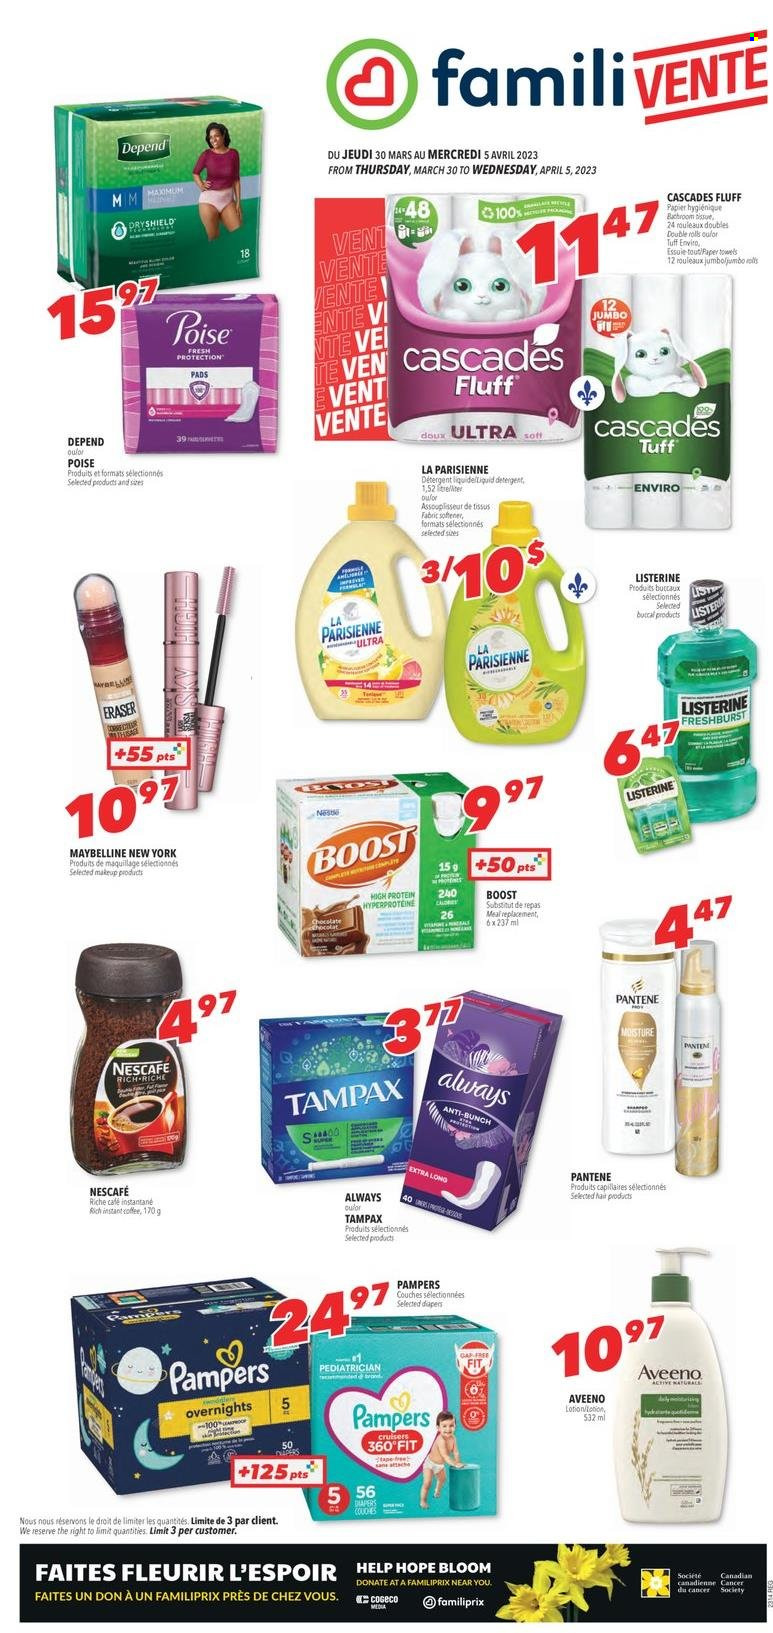 thumbnail - Familiprix Flyer - March 30, 2023 - April 05, 2023 - Sales products - chocolate, Mars, Boost, coffee, instant coffee, Pampers, nappies, Aveeno, tissues, kitchen towels, paper towels, fabric softener, hair products, Pantene, body lotion, makeup, Maybelline, detergent, Listerine, Tampax, Nescafé. Page 1.